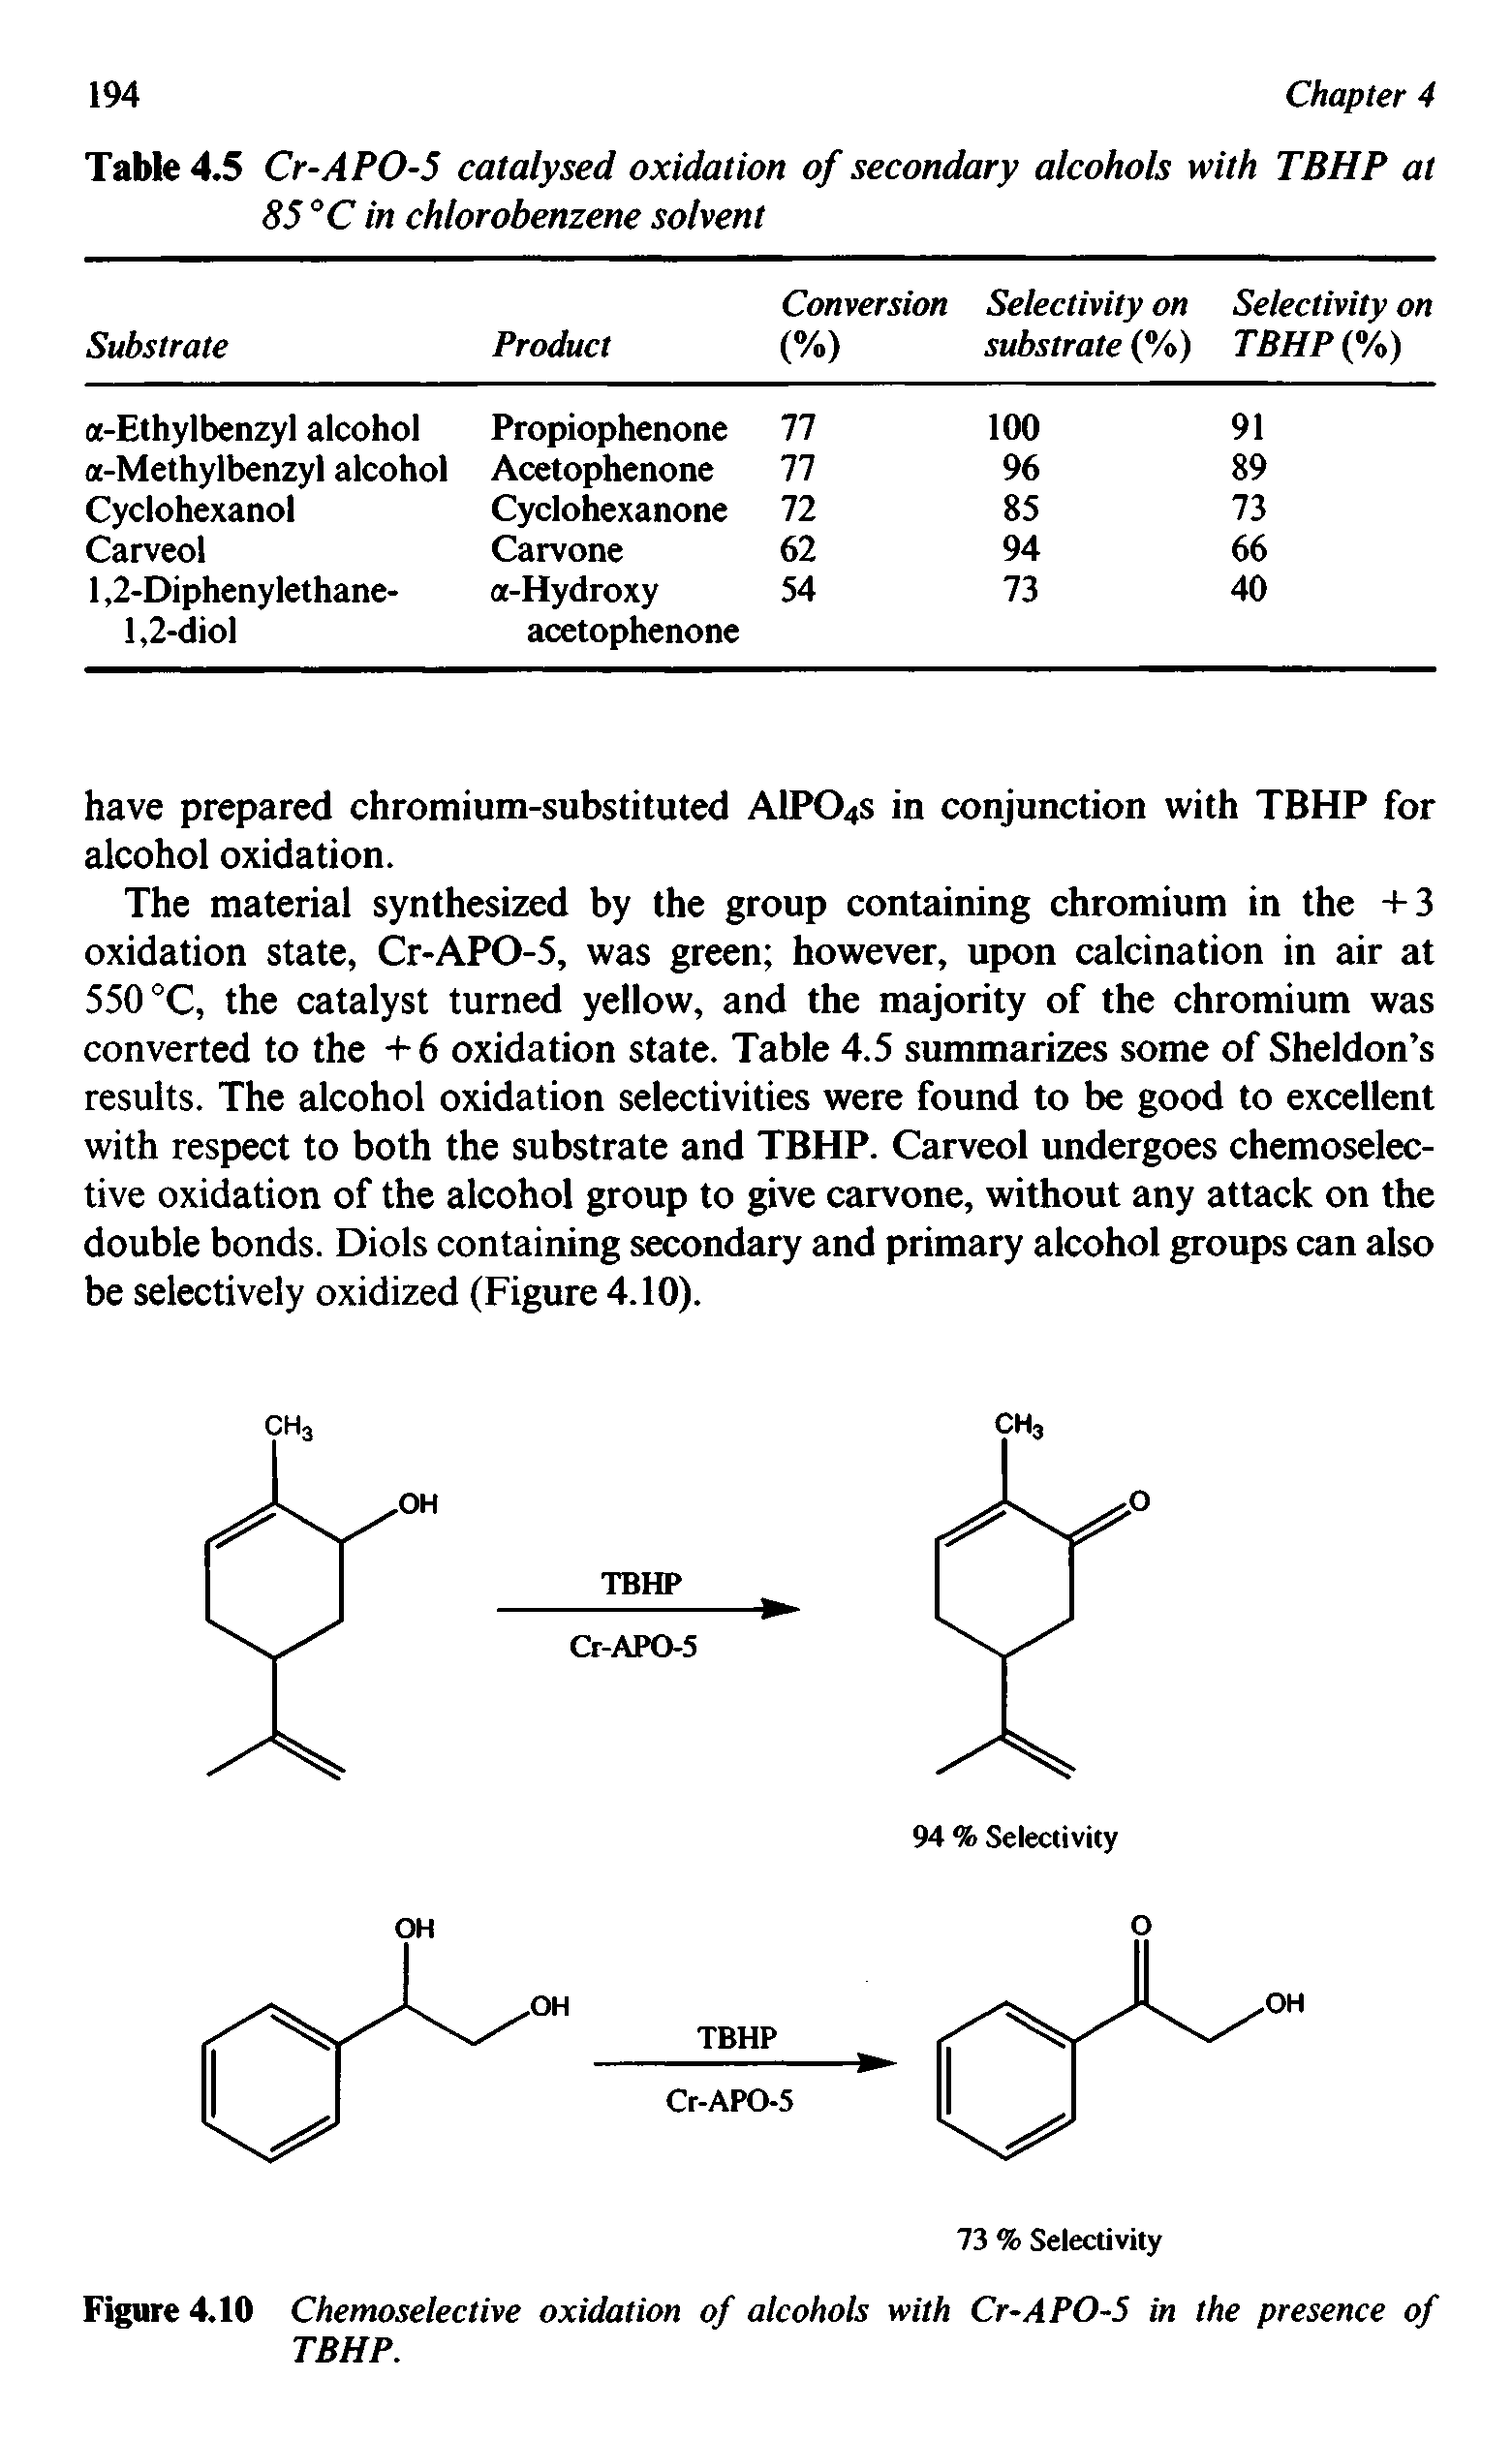 Figure 4.10 Chemoselective oxidation of alcohols with Cr-APO-5 in the presence of TBHP.